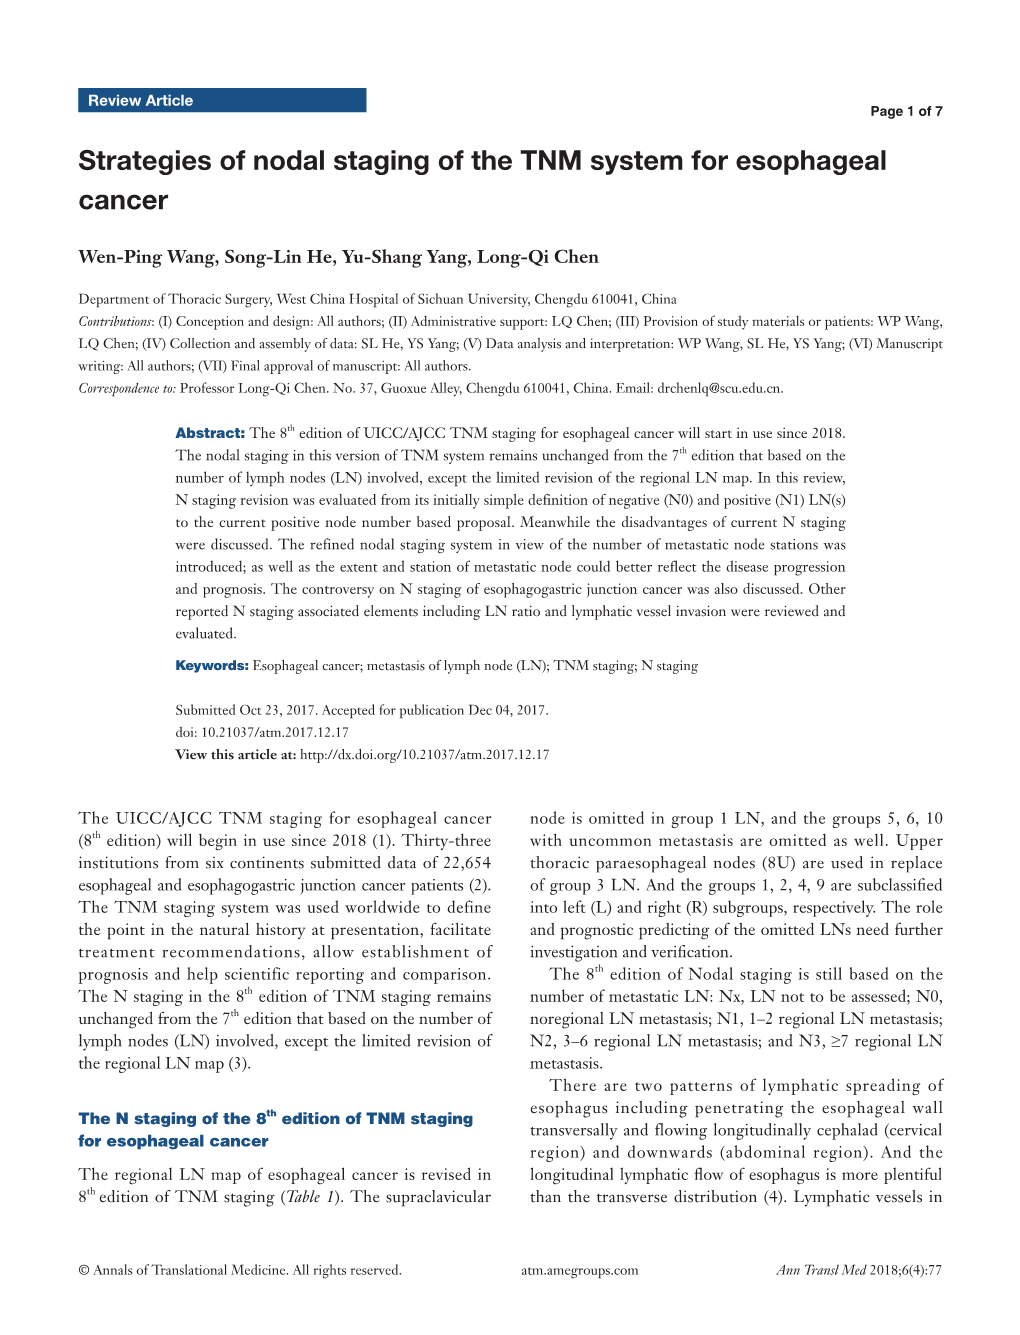 Strategies of Nodal Staging of the TNM System for Esophageal Cancer